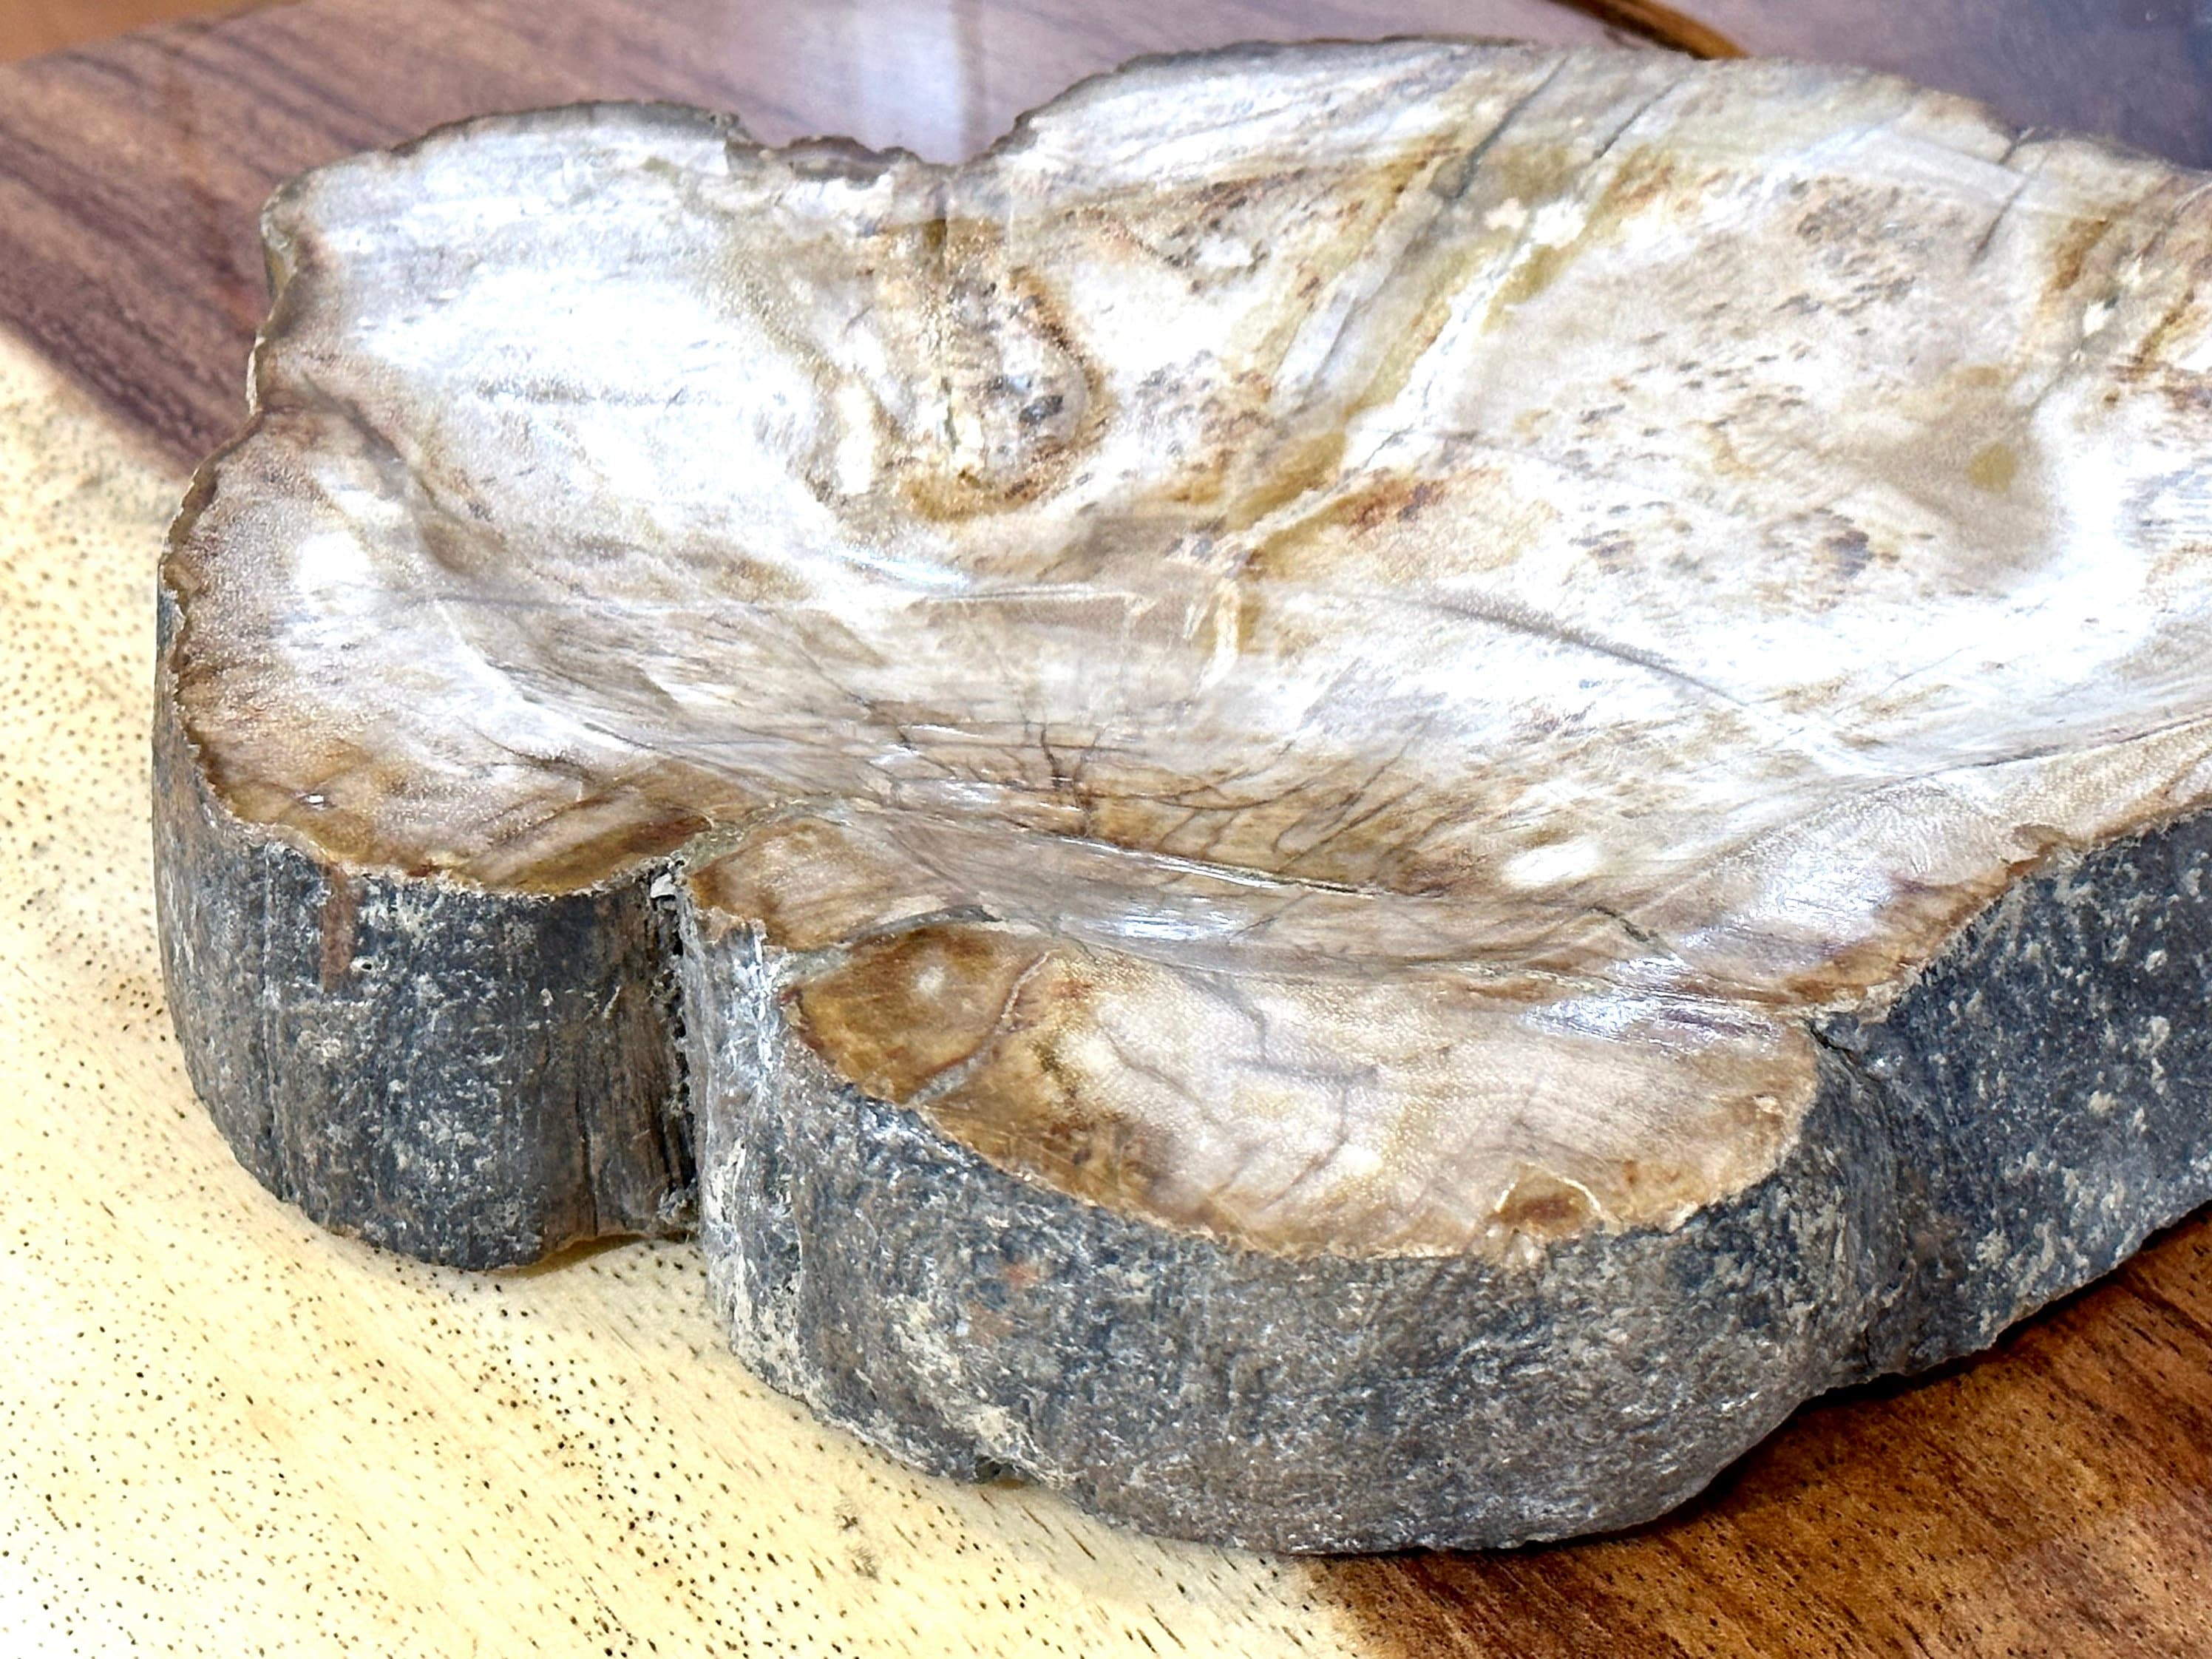 Petrified Wood Decorative Bowl - Handcrafted One of a Kind - Home Decor - Bowl